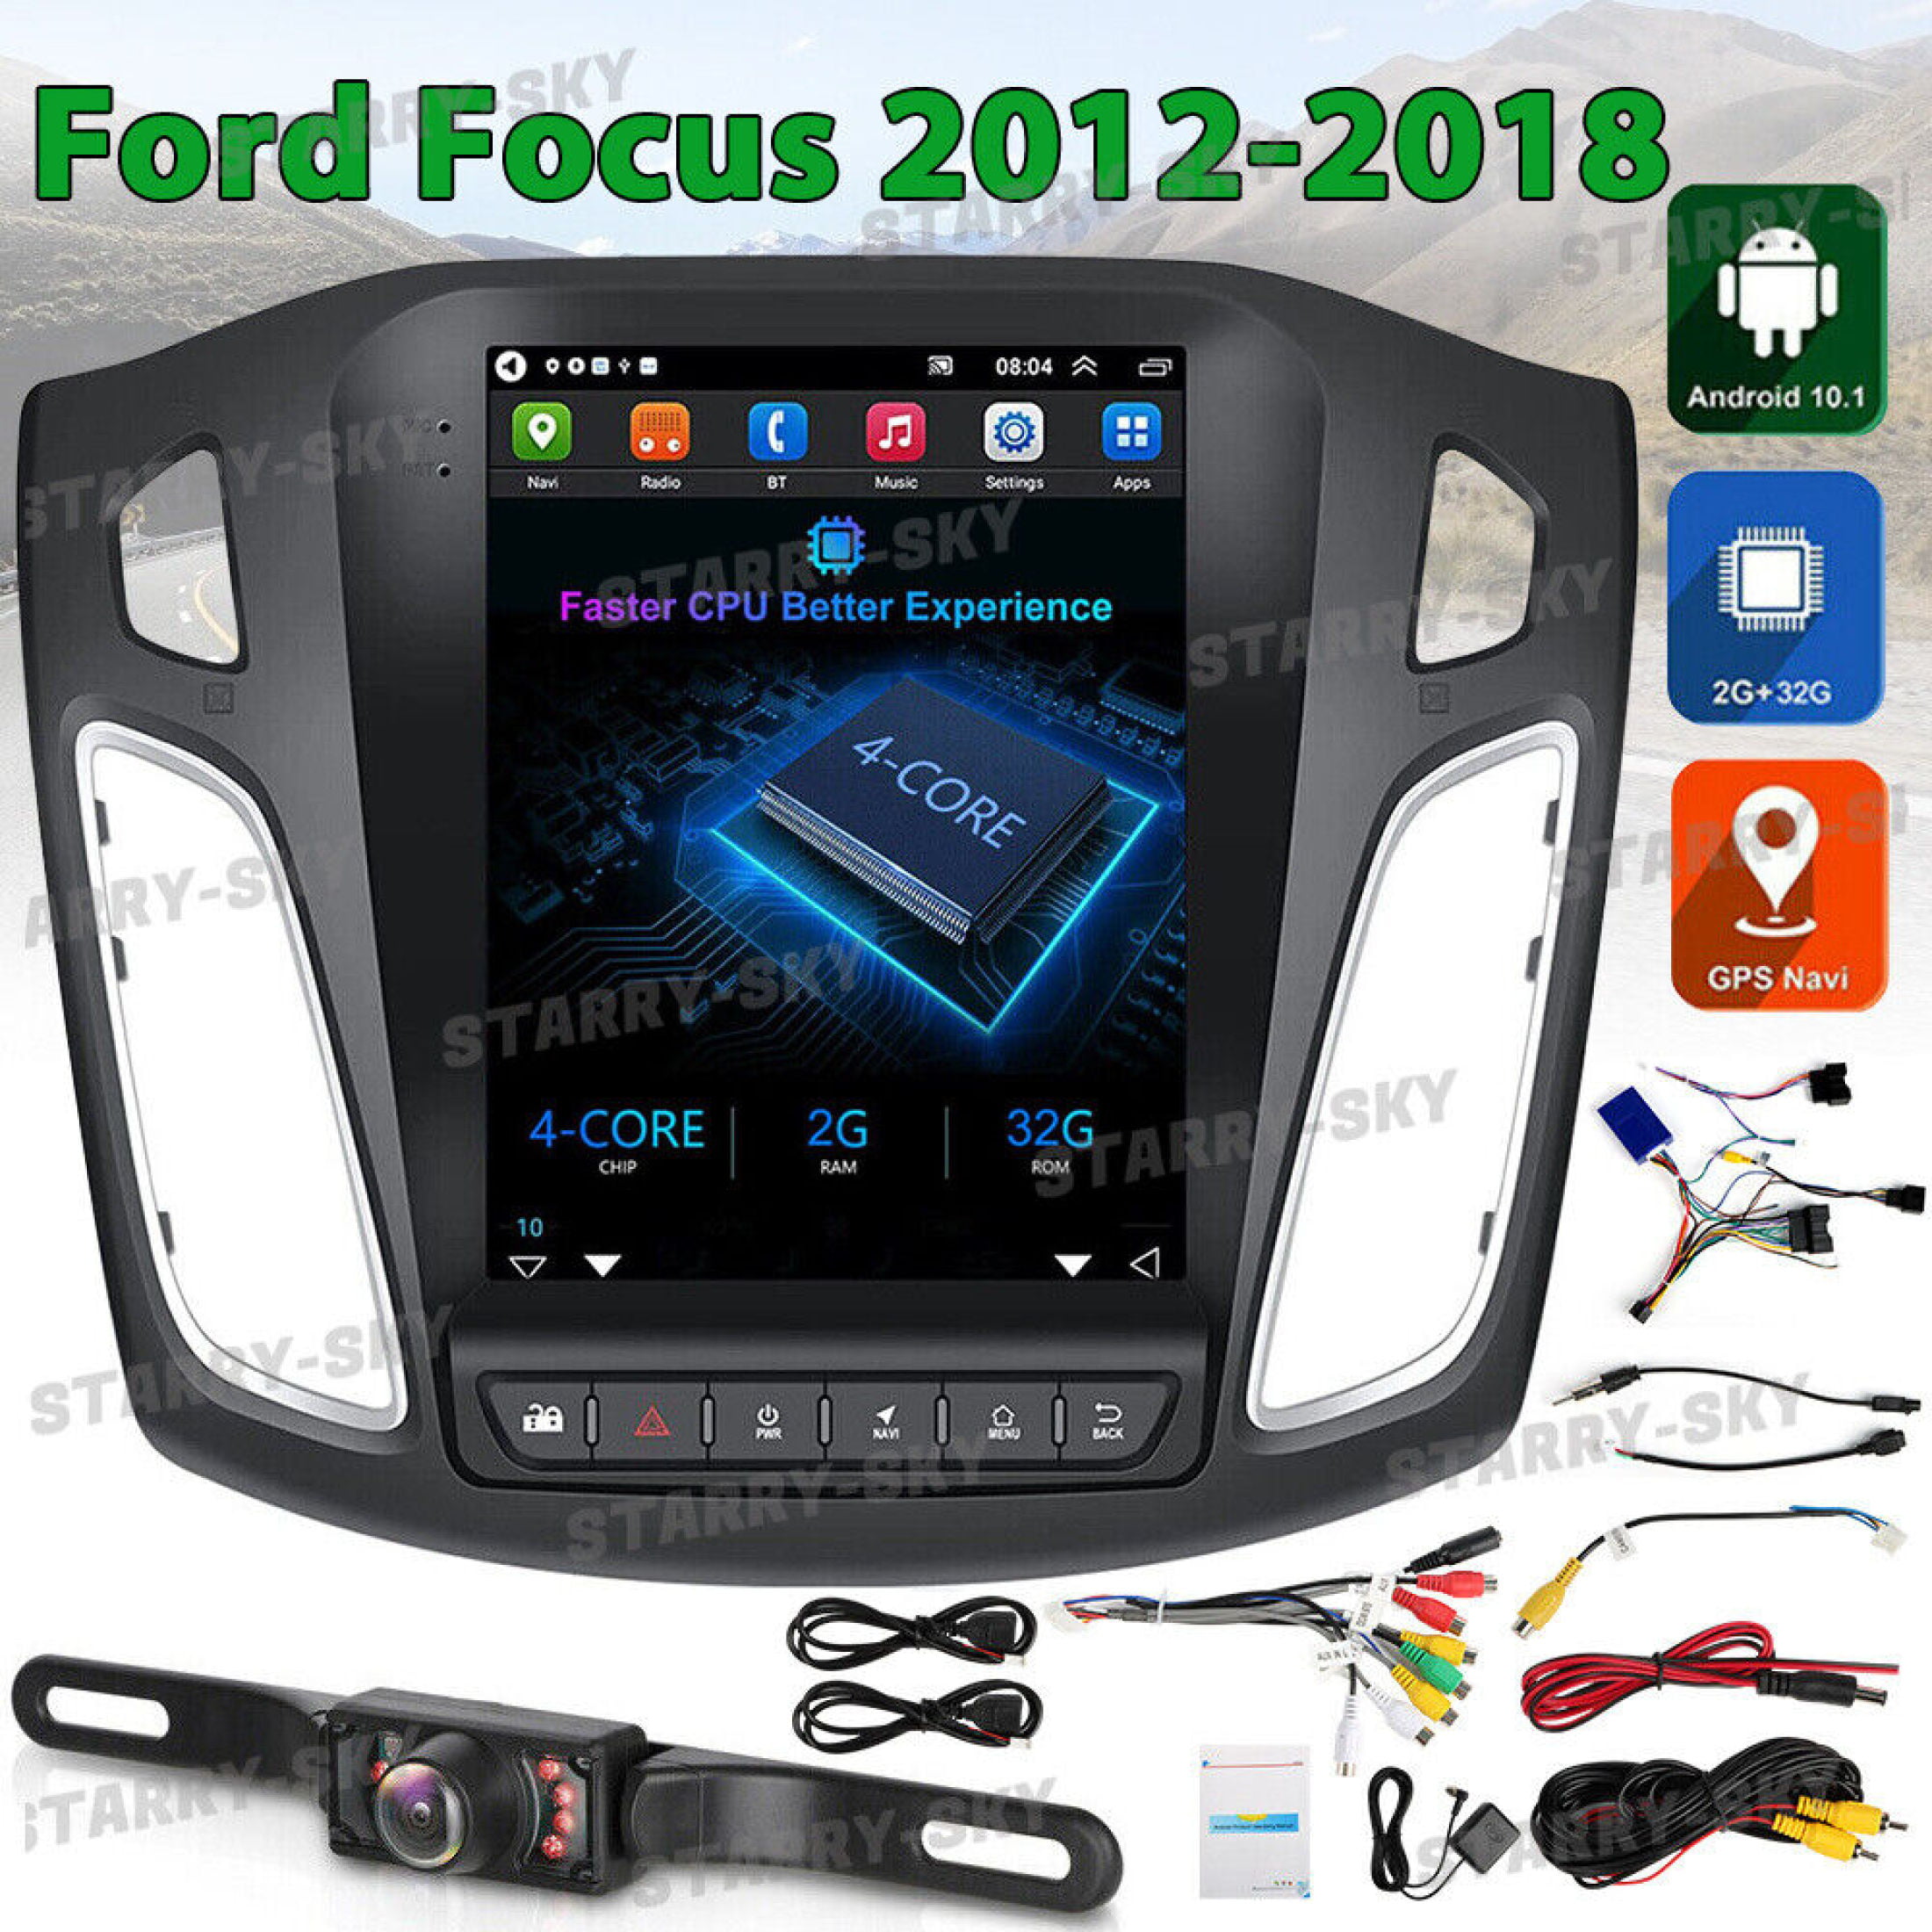 Zcargel For 2012-2018 Ford Focus GPS Navi Android 12 Car Stereo